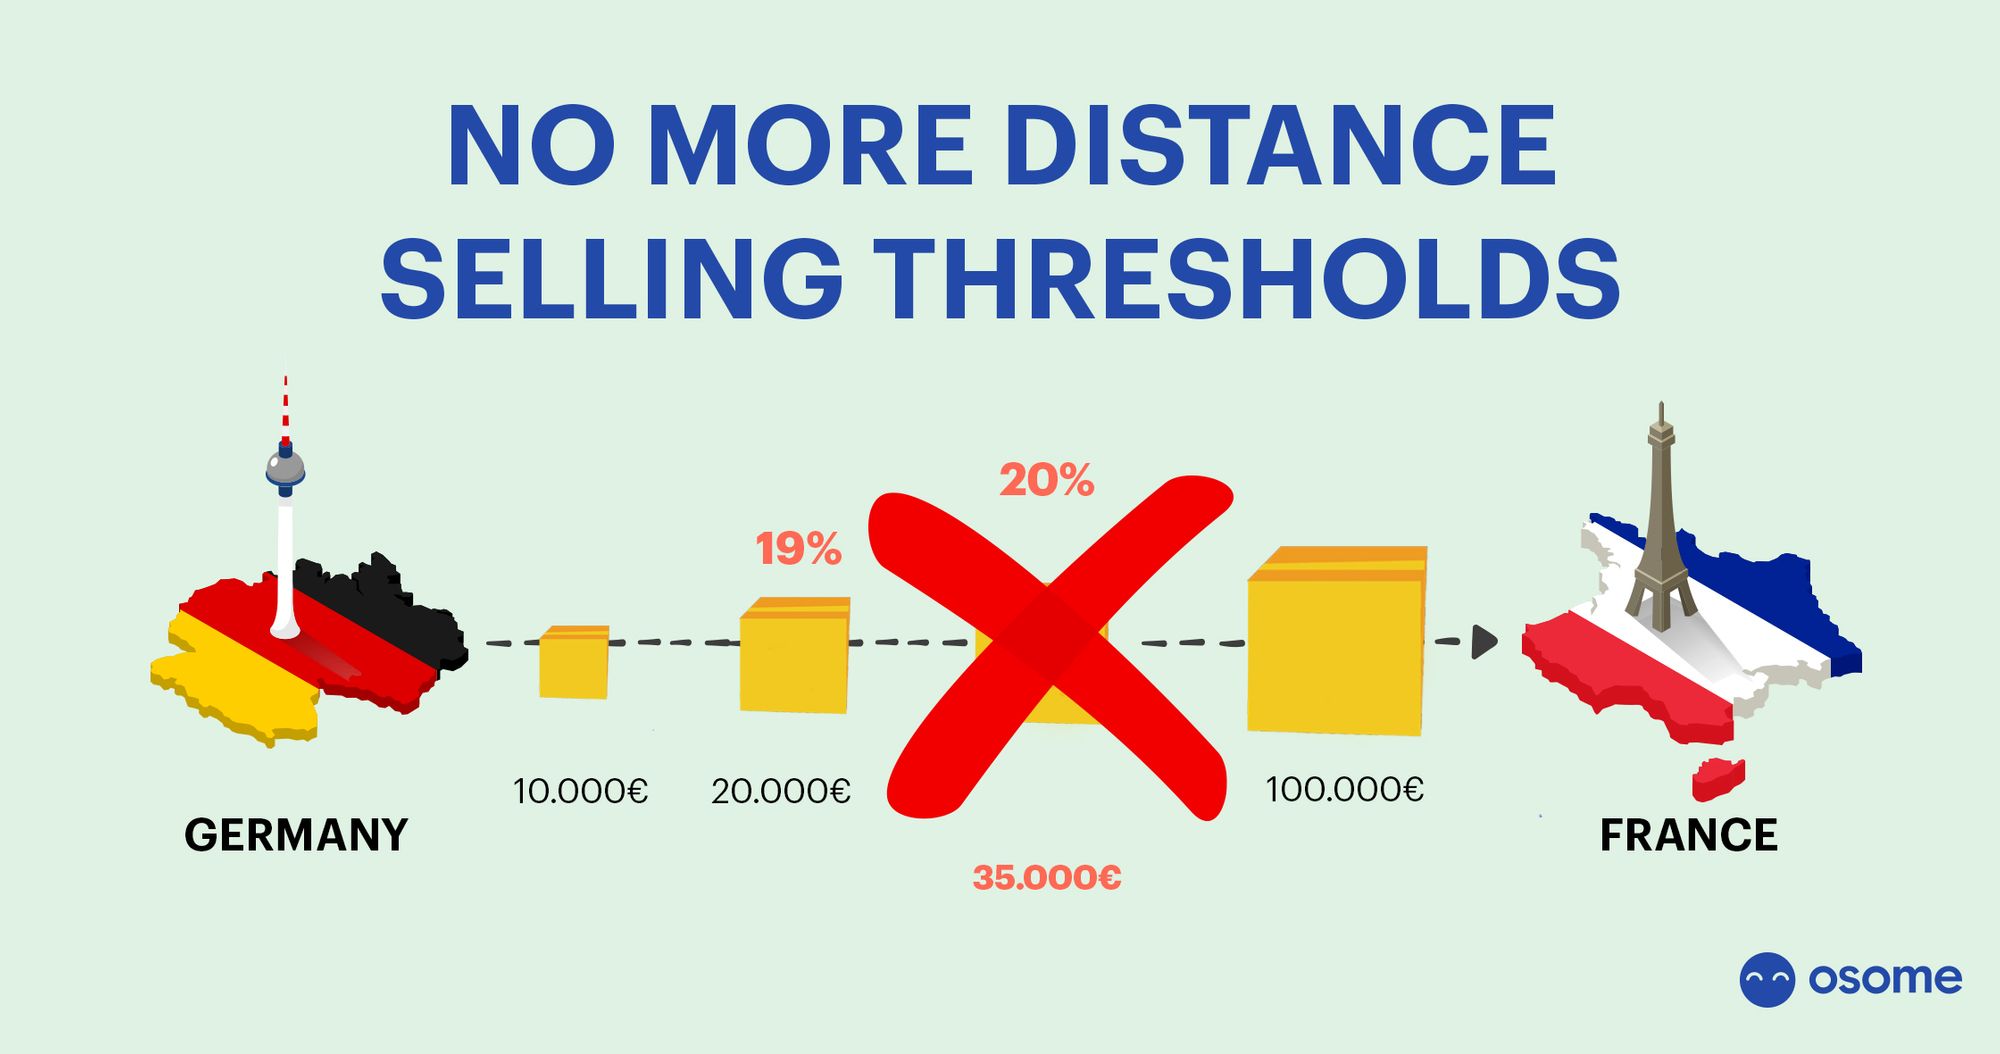 No More Distance Selling Thresholds